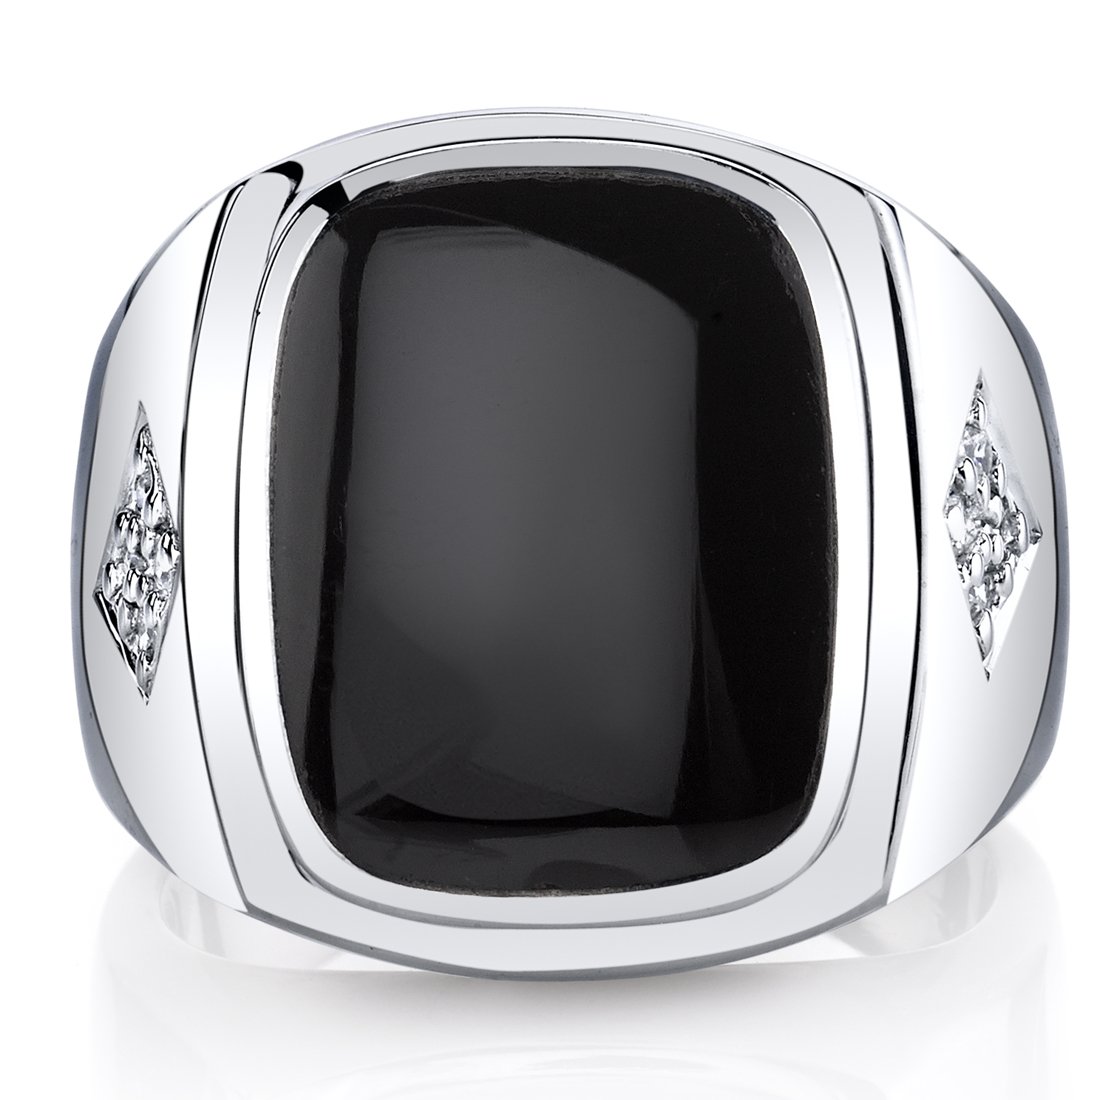 Peora Men's Genuine Black Onyx Knight Signet Ring 925 Sterling Silver, Large 15x12mm Cushion Cut Sizes 8 to 13